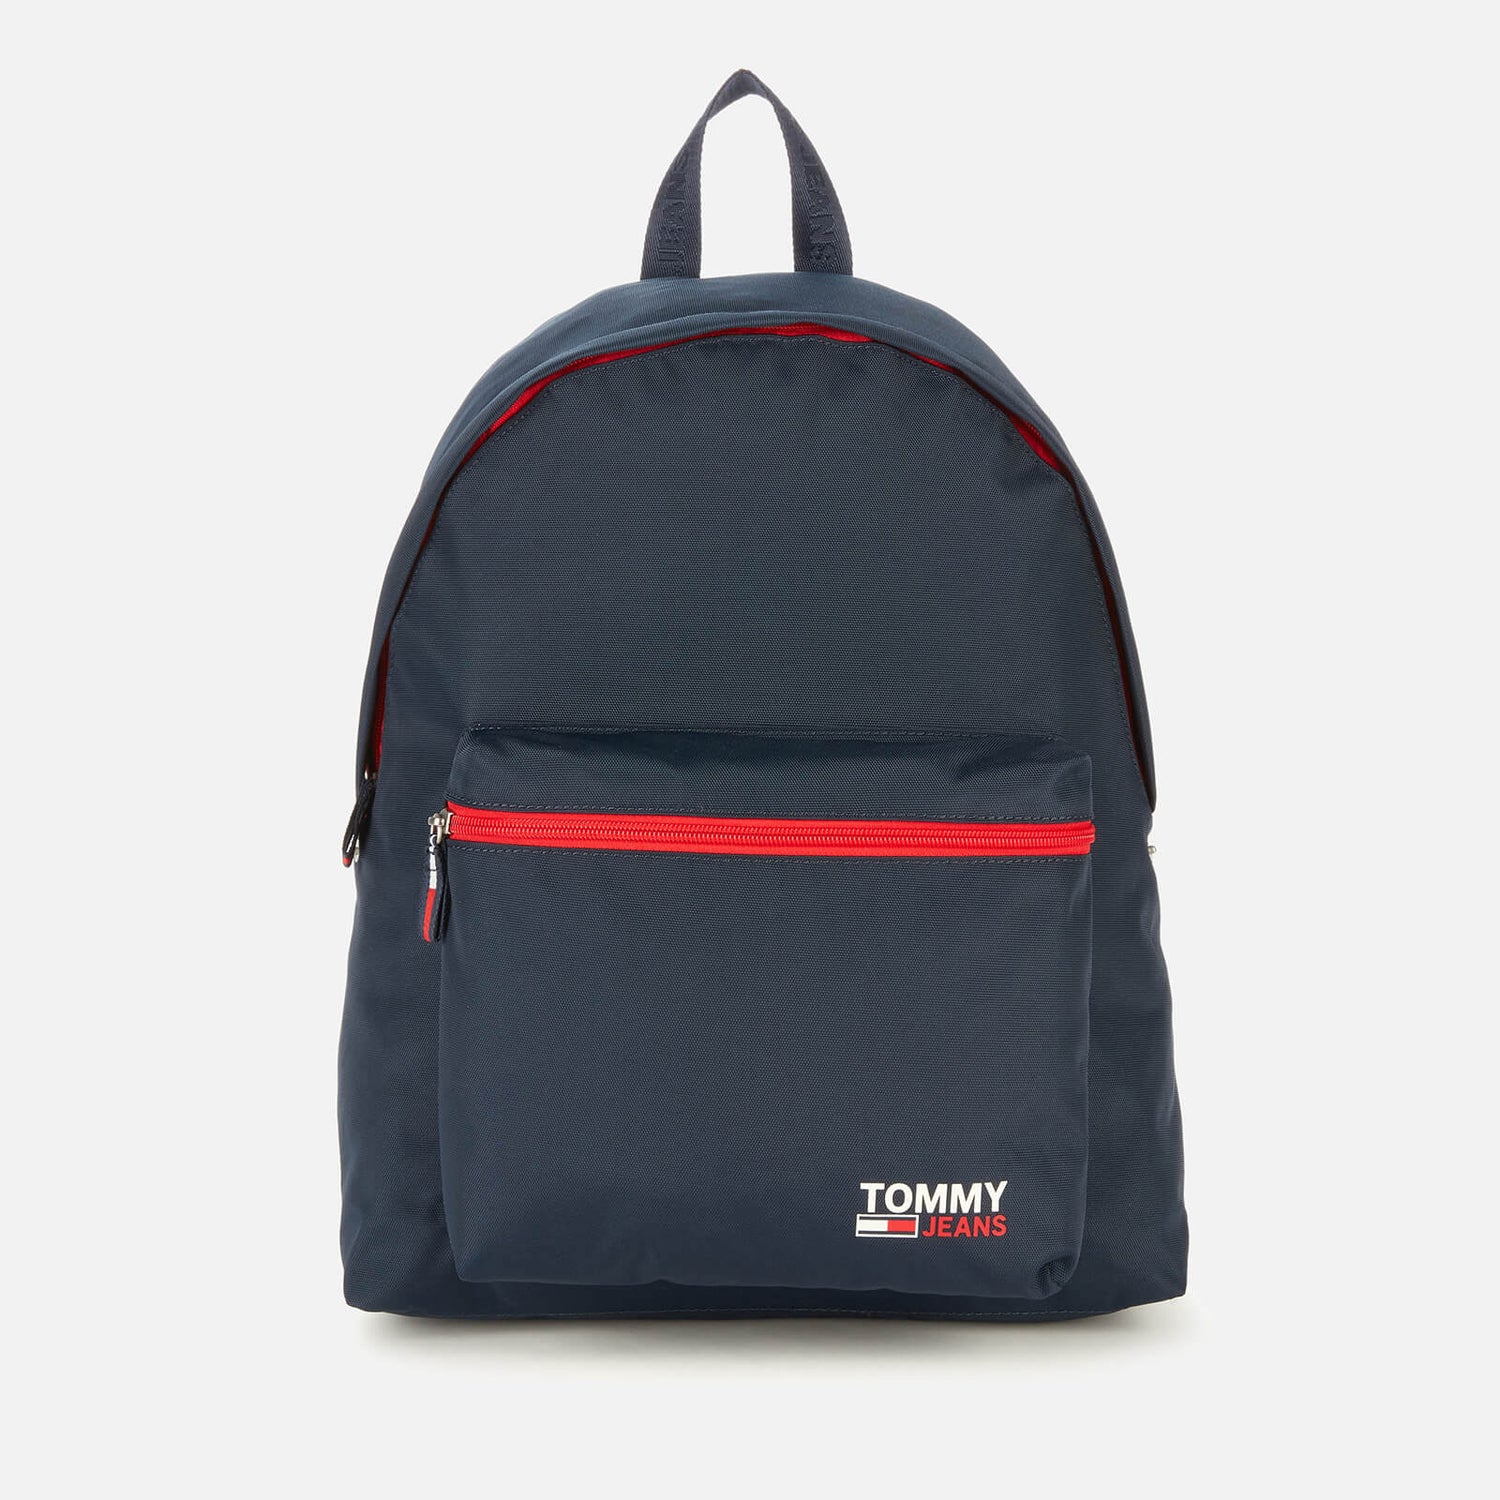 Tommy Jeans Men's Campus Backpack - Twilight Navy